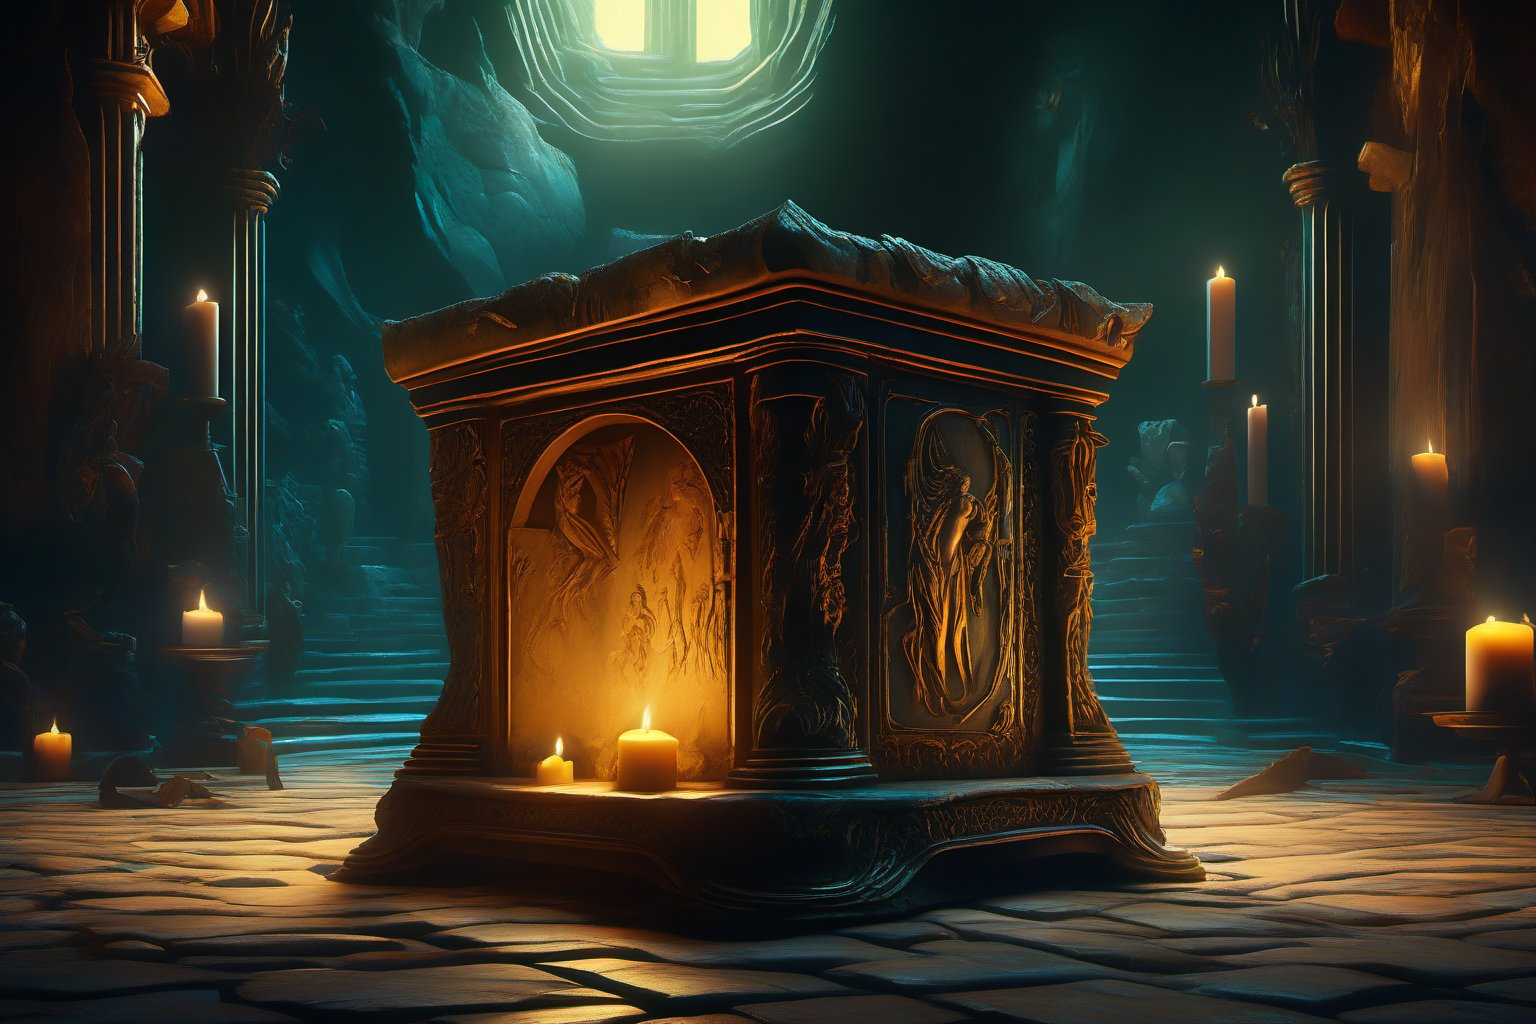 A mysterious Pandora's Box sits atop a worn stone pedestal, adorned with intricate carvings of ancient gods and mythical creatures. The box itself is ornate, featuring a delicate latch and a soft glow emanating from within. A subtle golden light illuminates the dark recesses of the surrounding chamber, casting long shadows across the walls. In the foreground, a single, flickering candle casts an eerie ambiance.